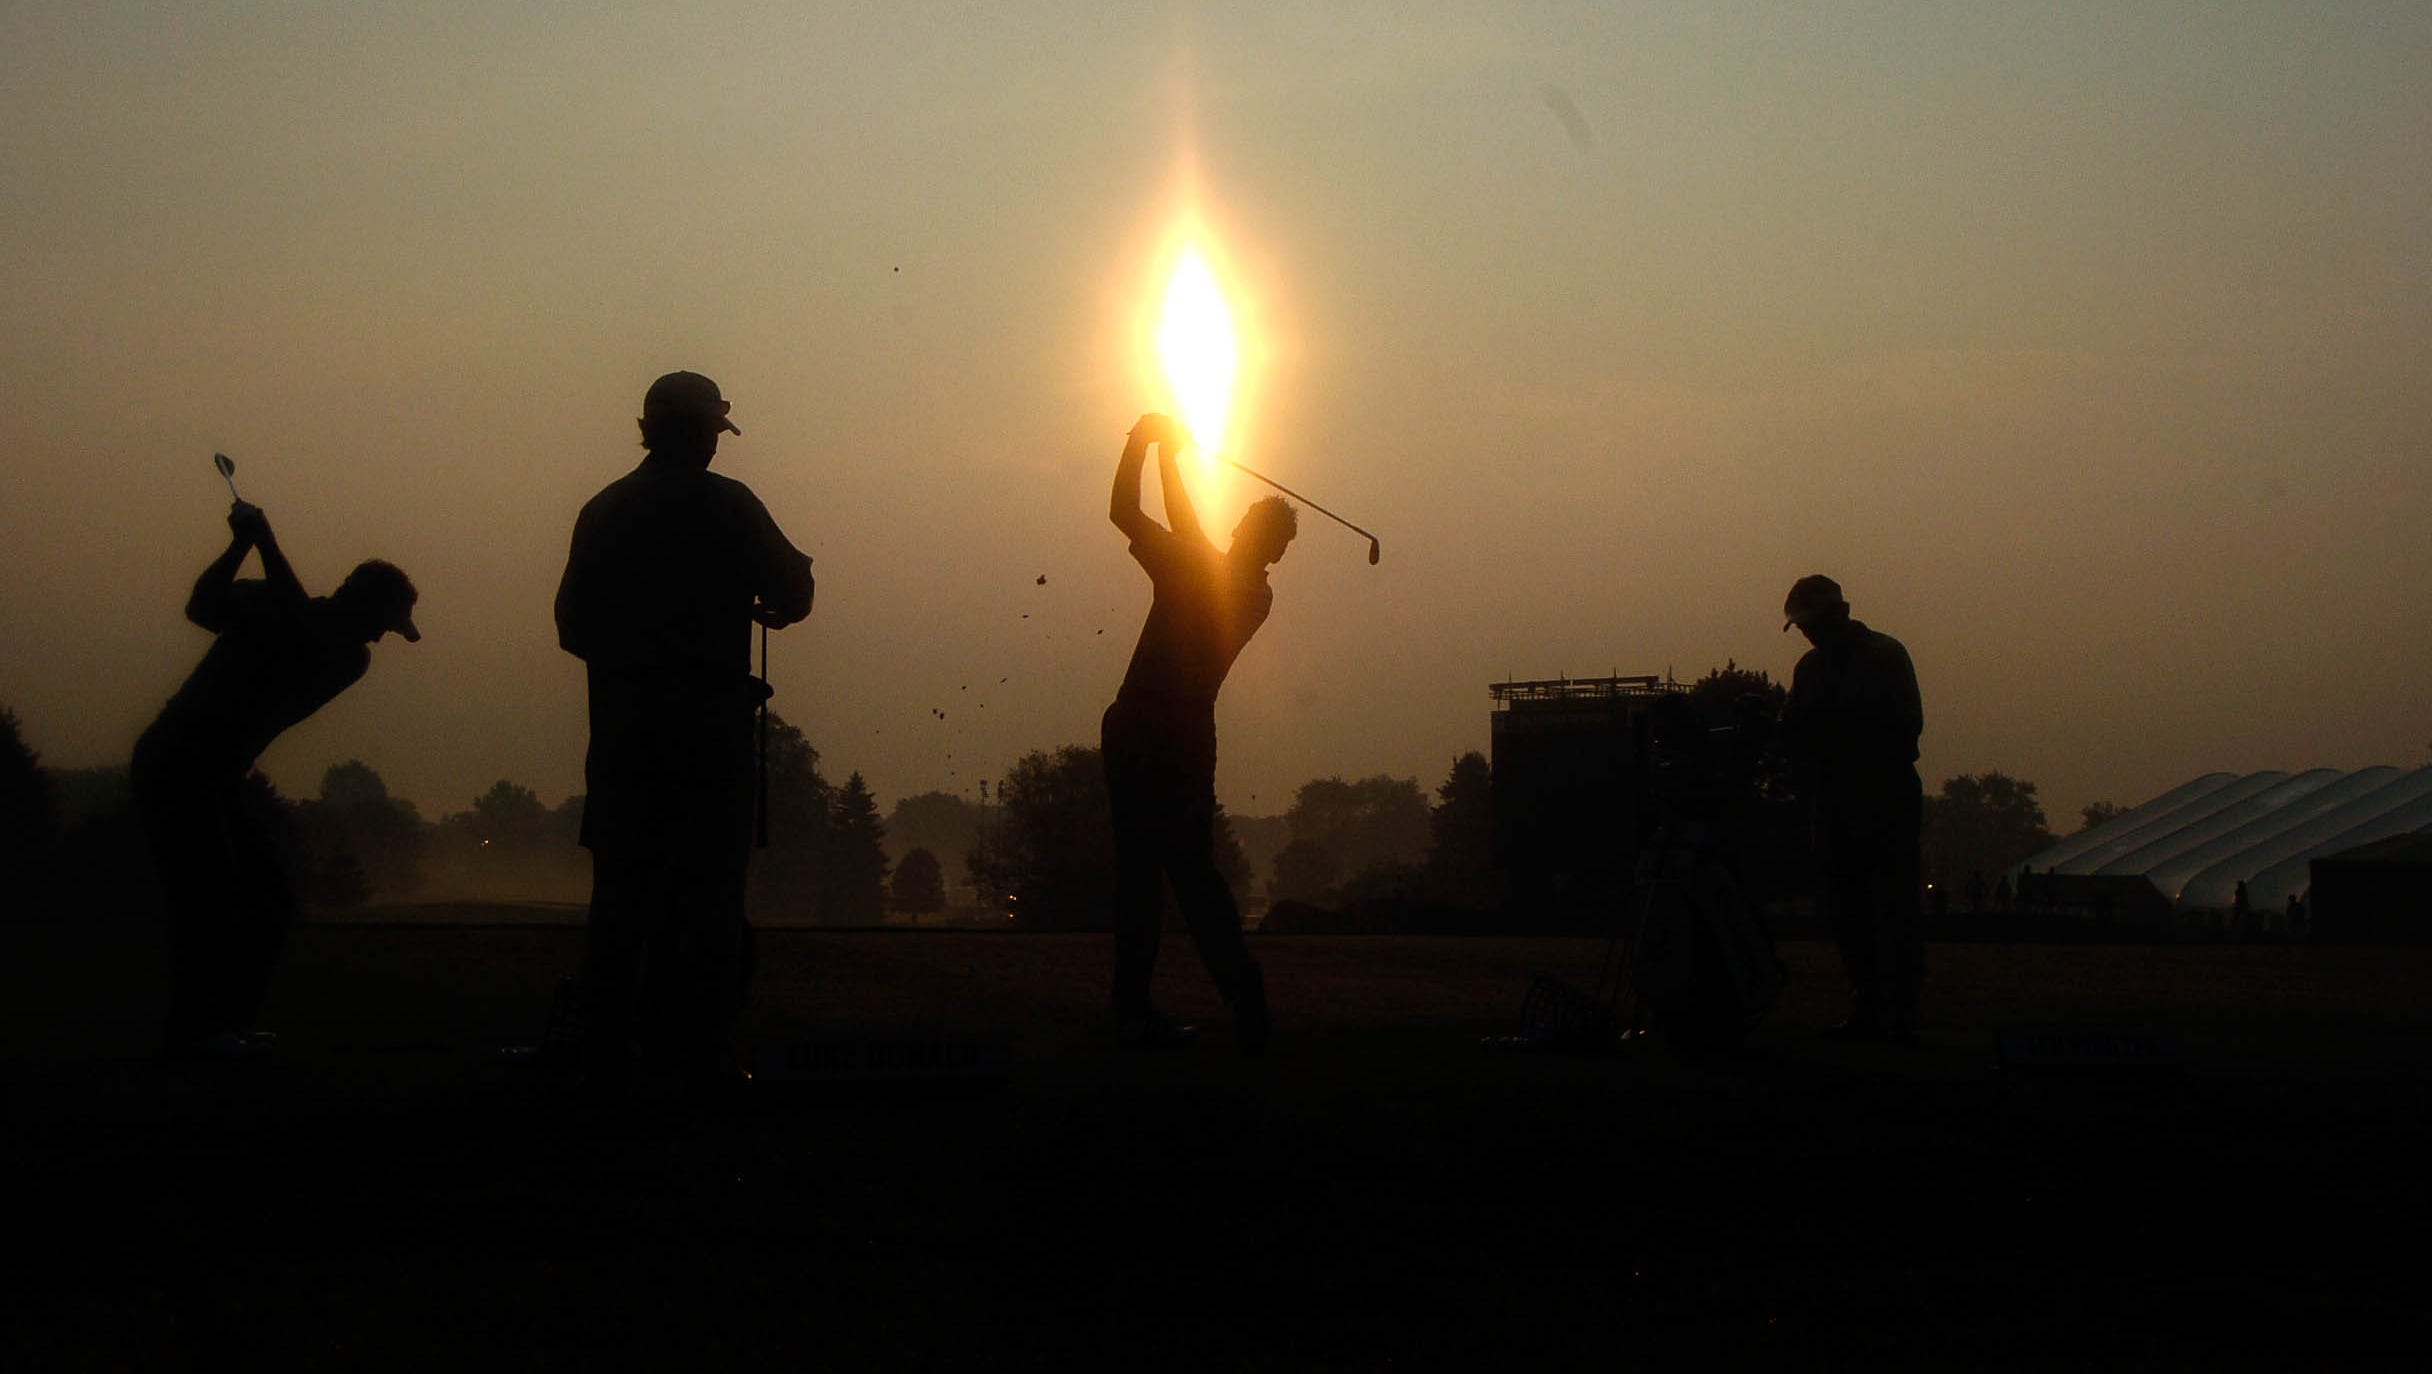 The sun rises as Team Europe practices before the start of the 2004 Ryder Cup.